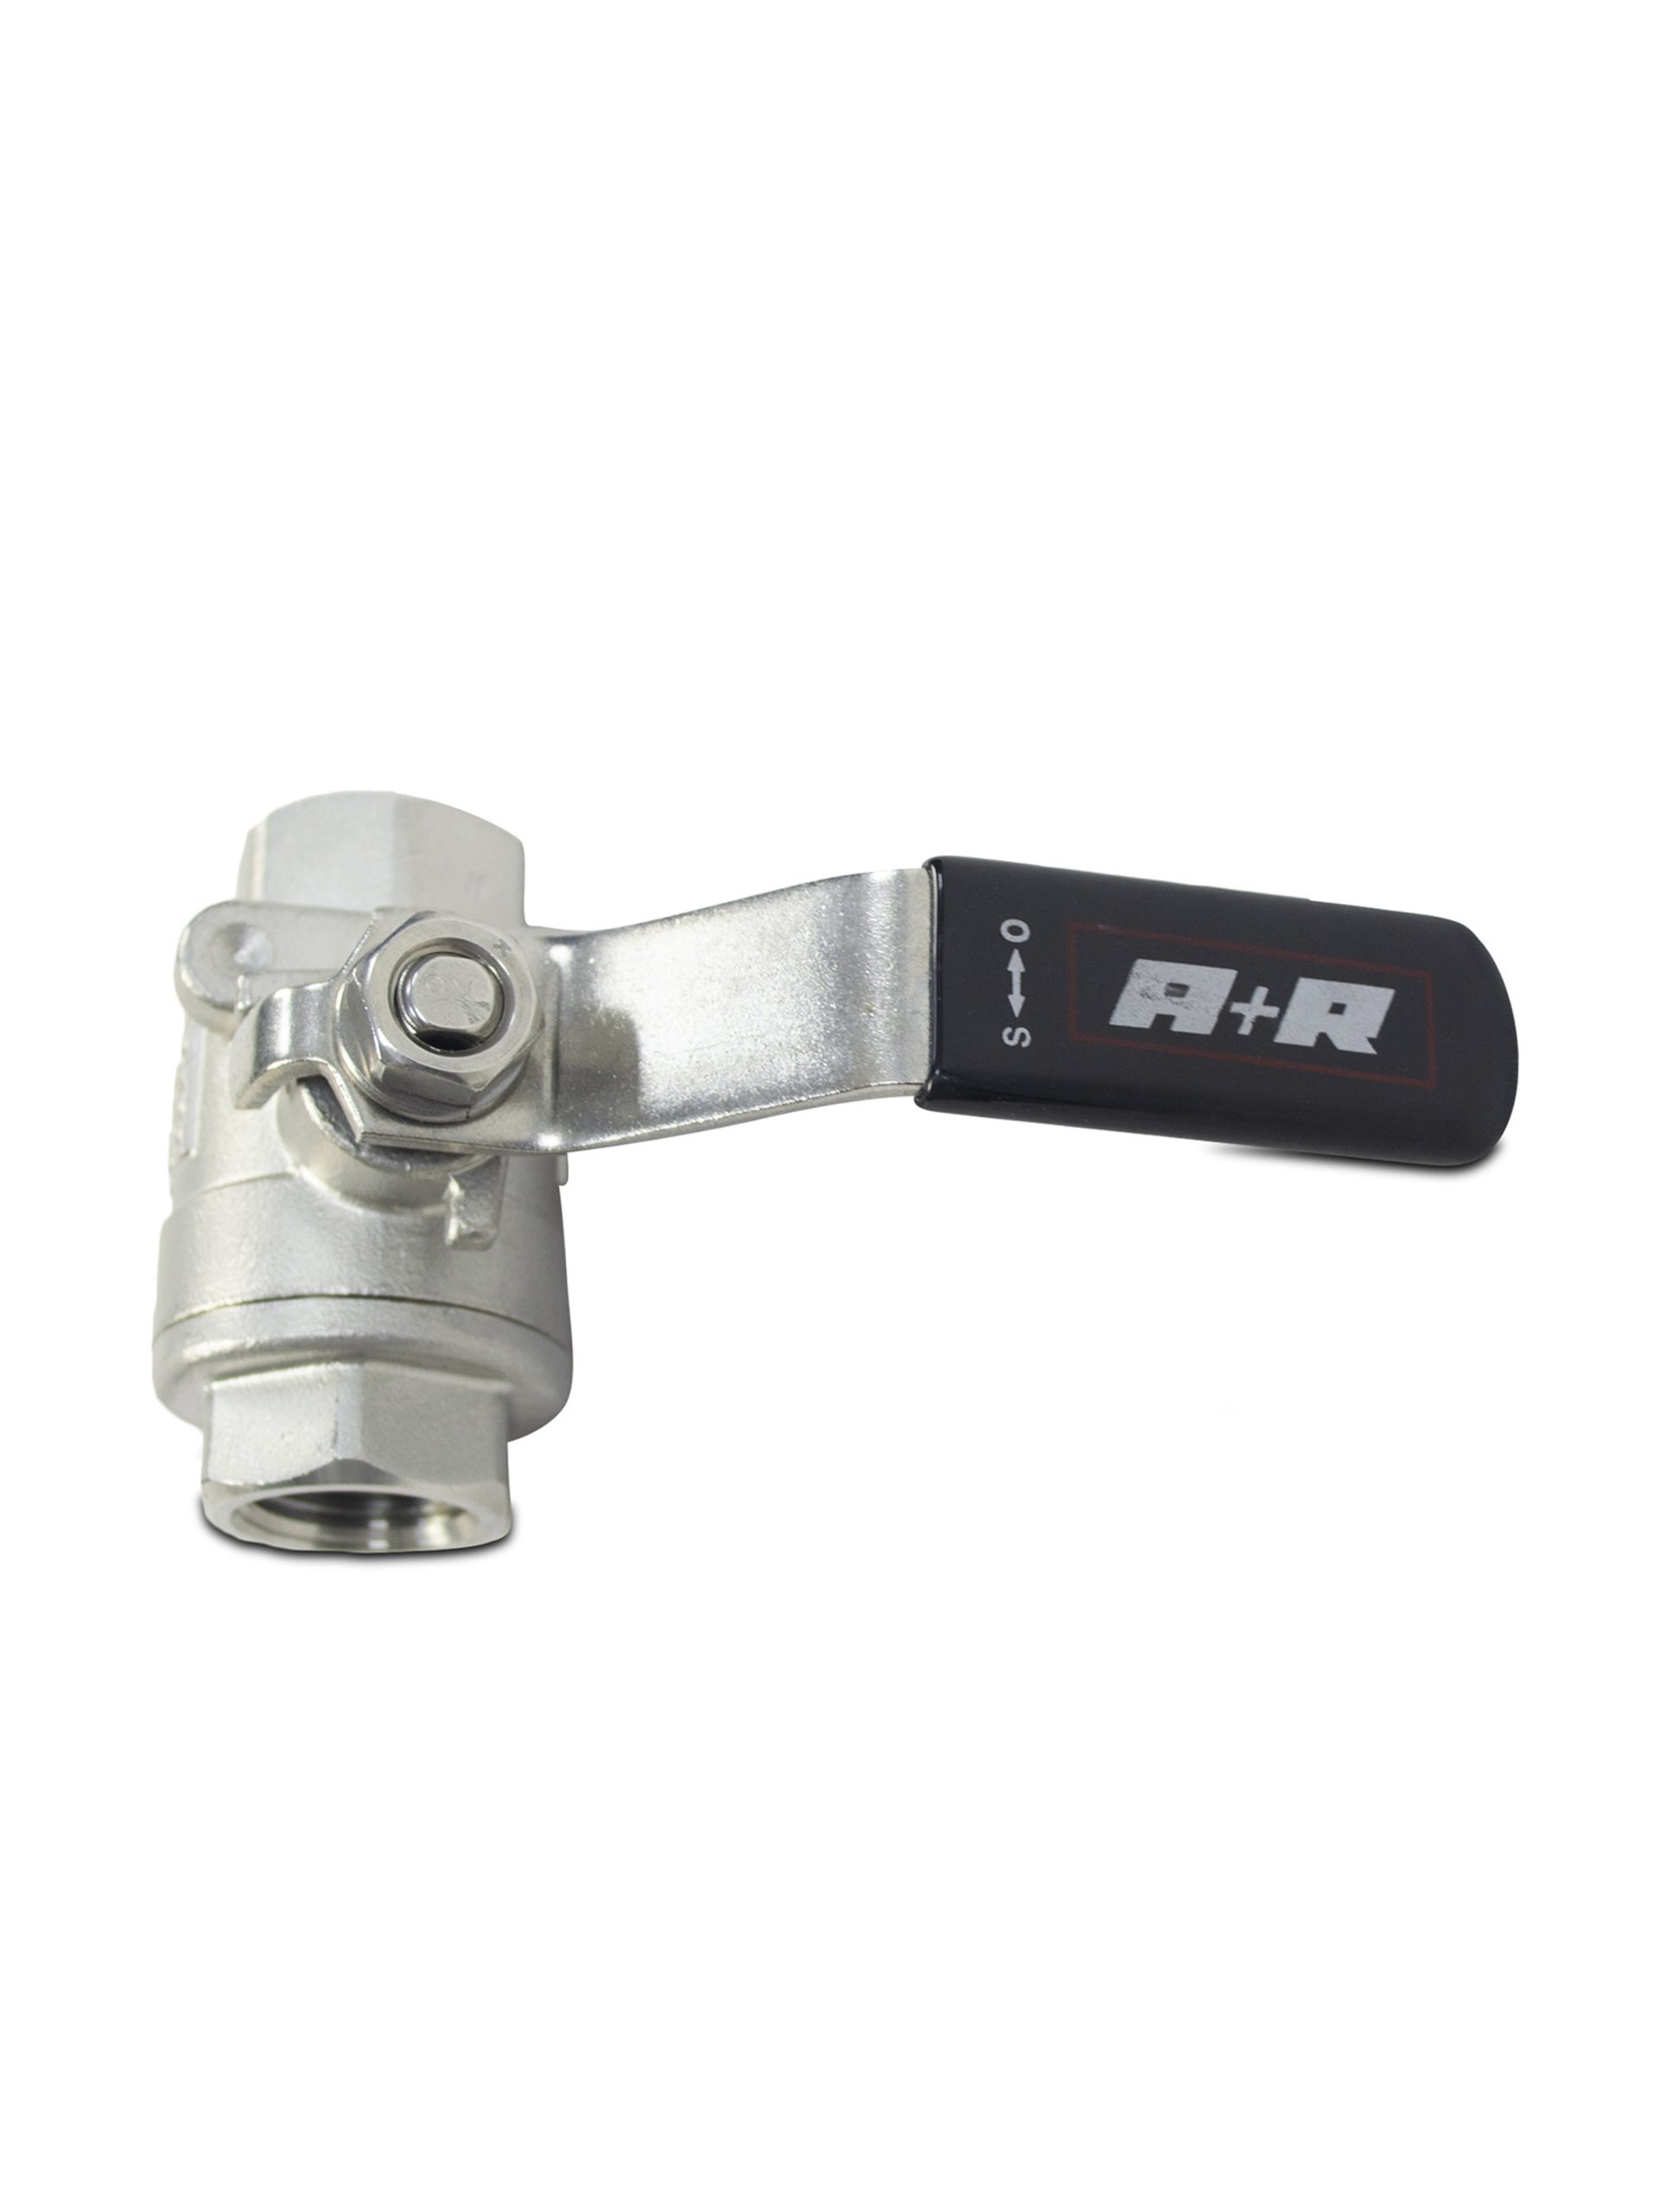 BALL VALVE STAINLESS STEEL 1/2 INCHES in UAE